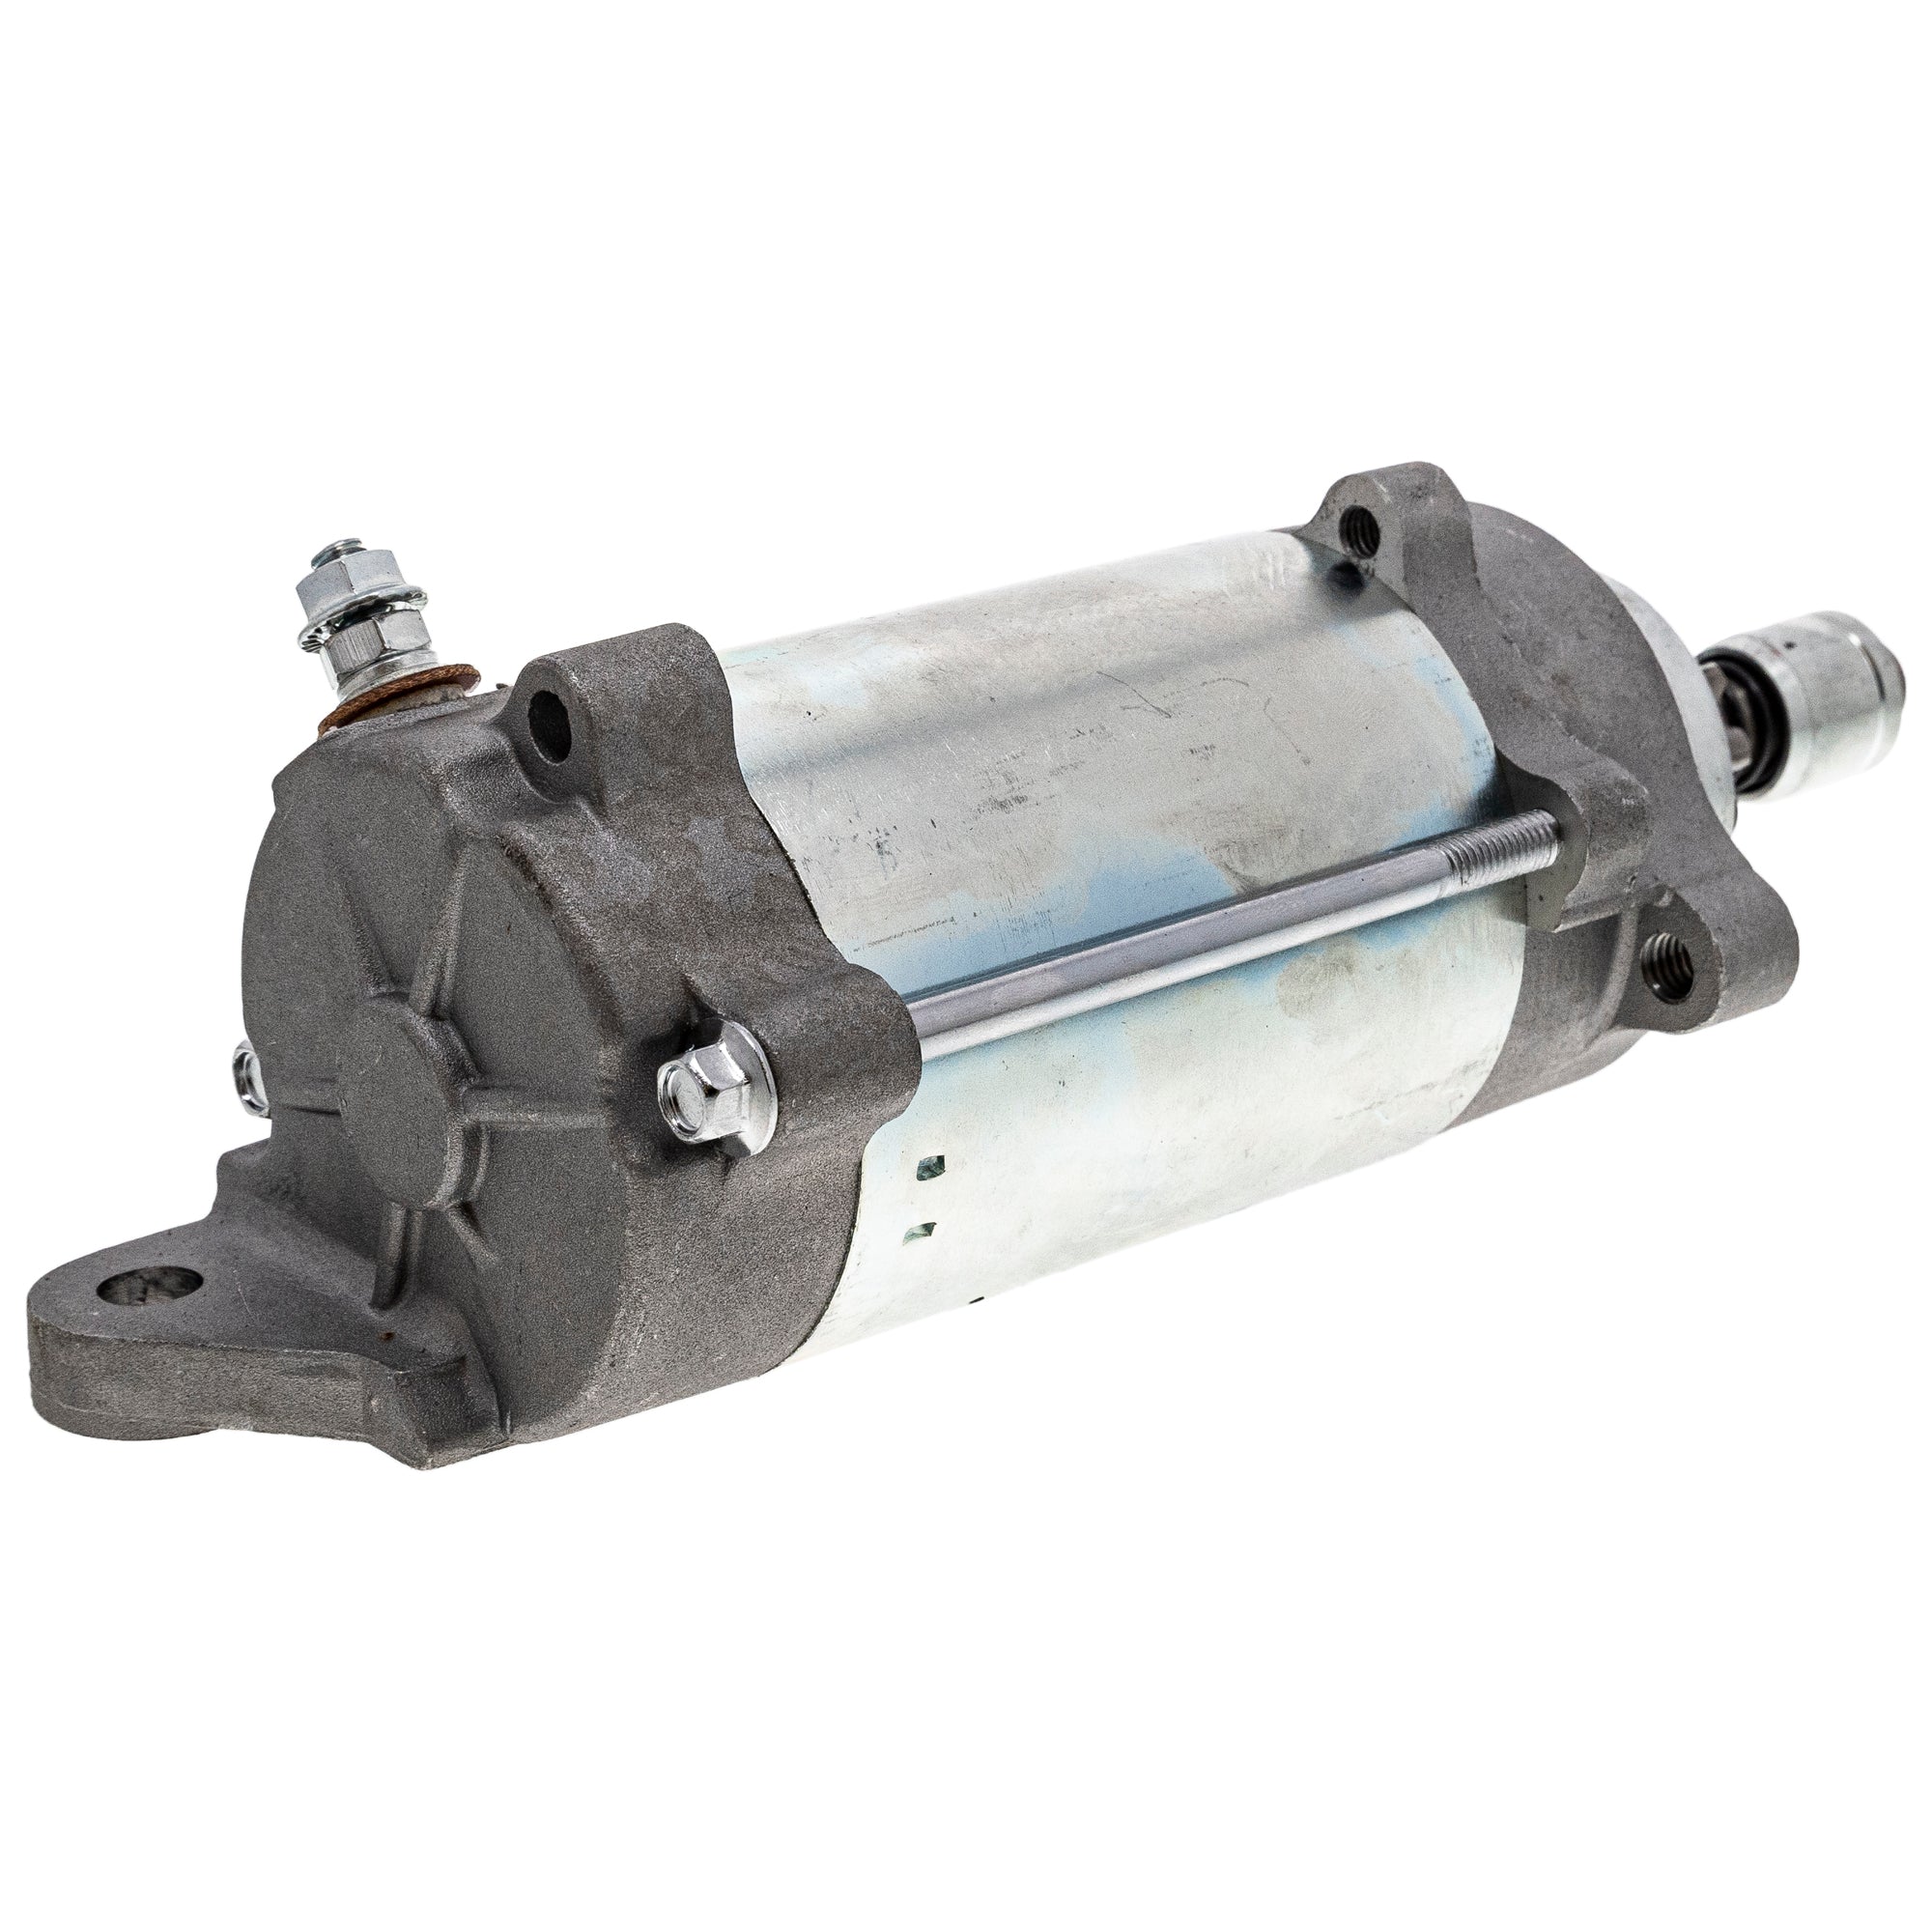 Starter Motor Assembly 519-CSM2383O For Ski-Doo Can-Am 515178473 515178187 515177389 515177047